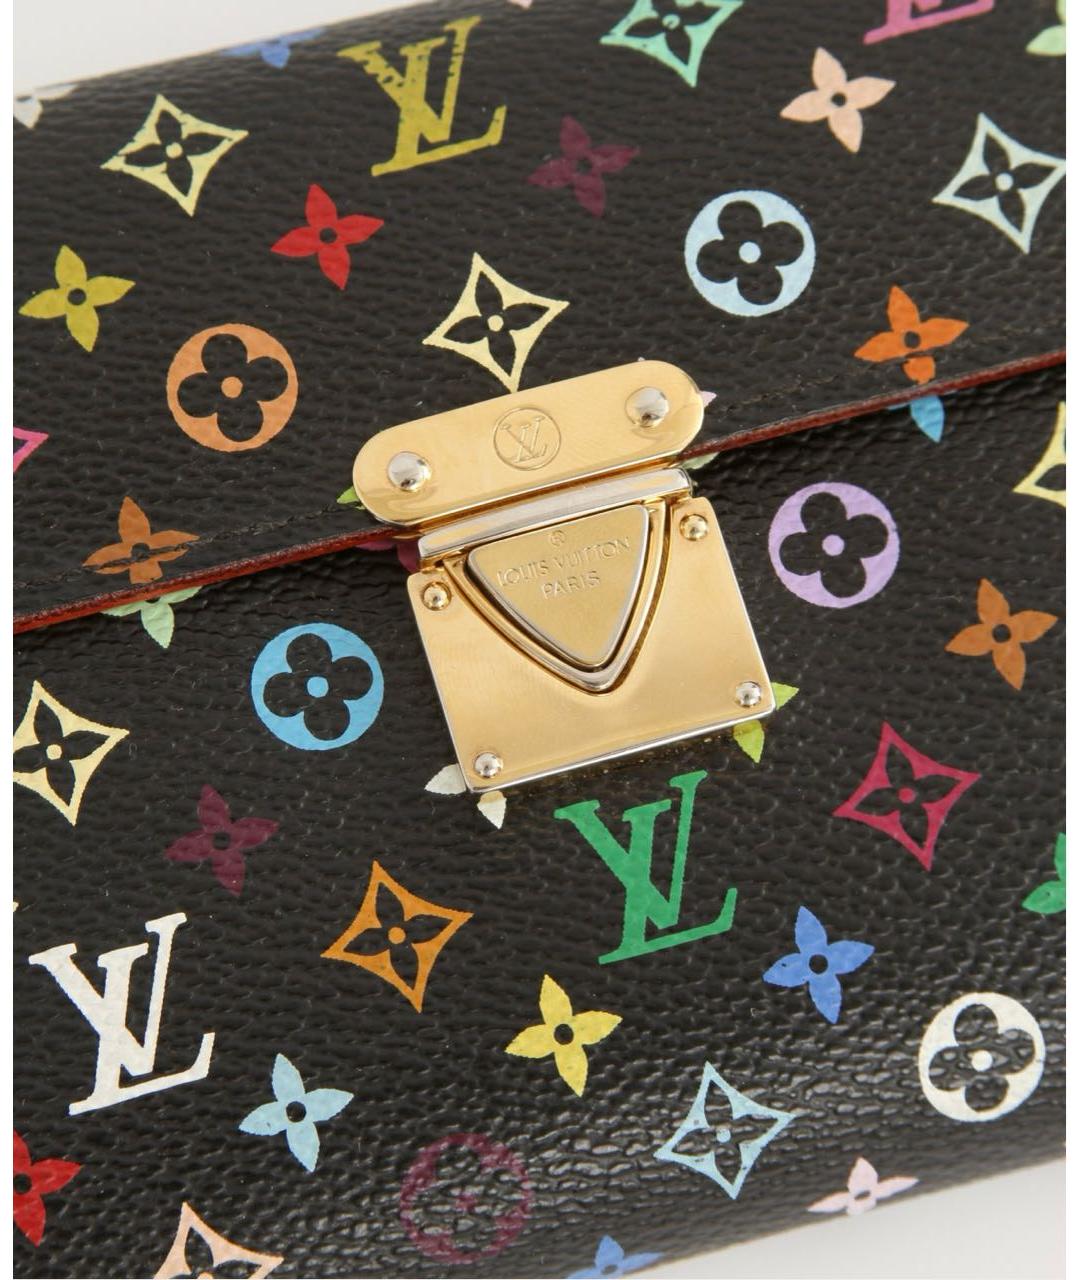 LOUIS VUITTON PRE-OWNED Мульти кошелек, фото 7